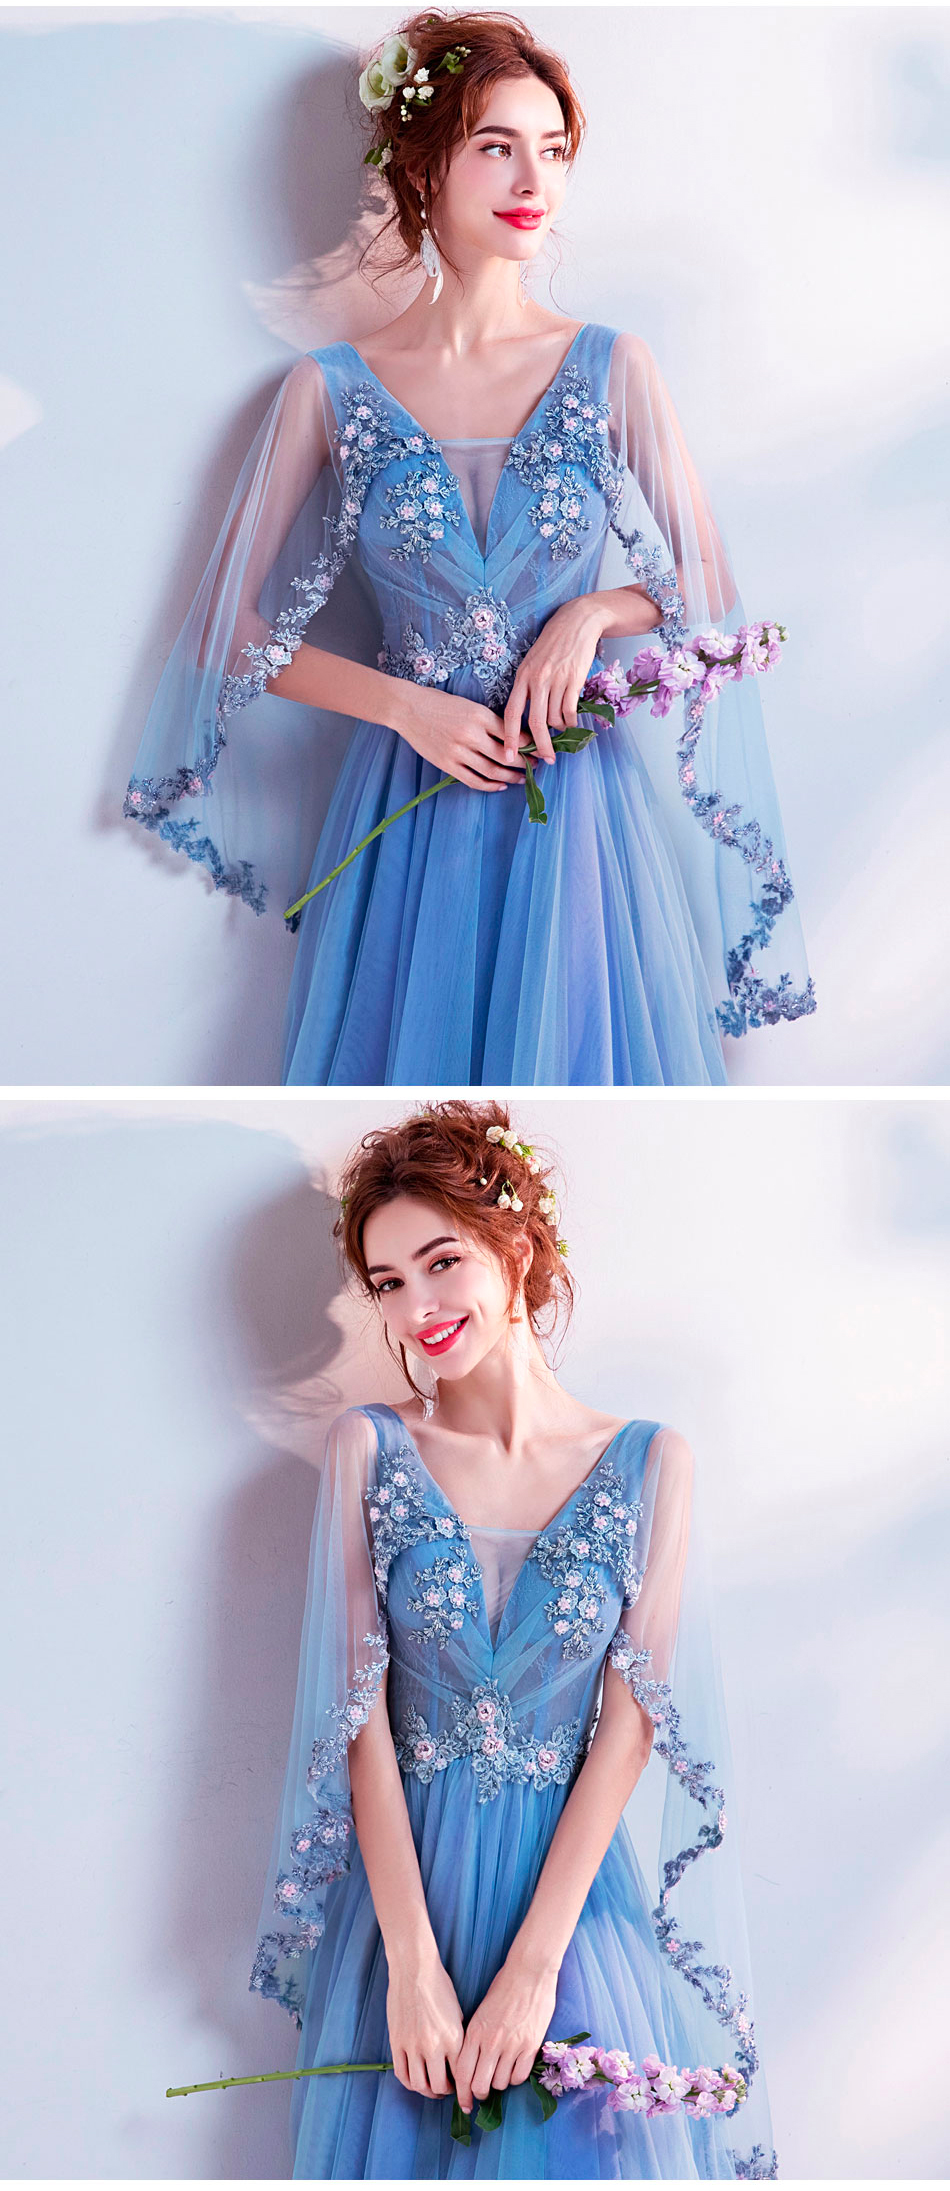 Beautiful Long Sleeve Blue Tulle Long Floral Prom Dress11